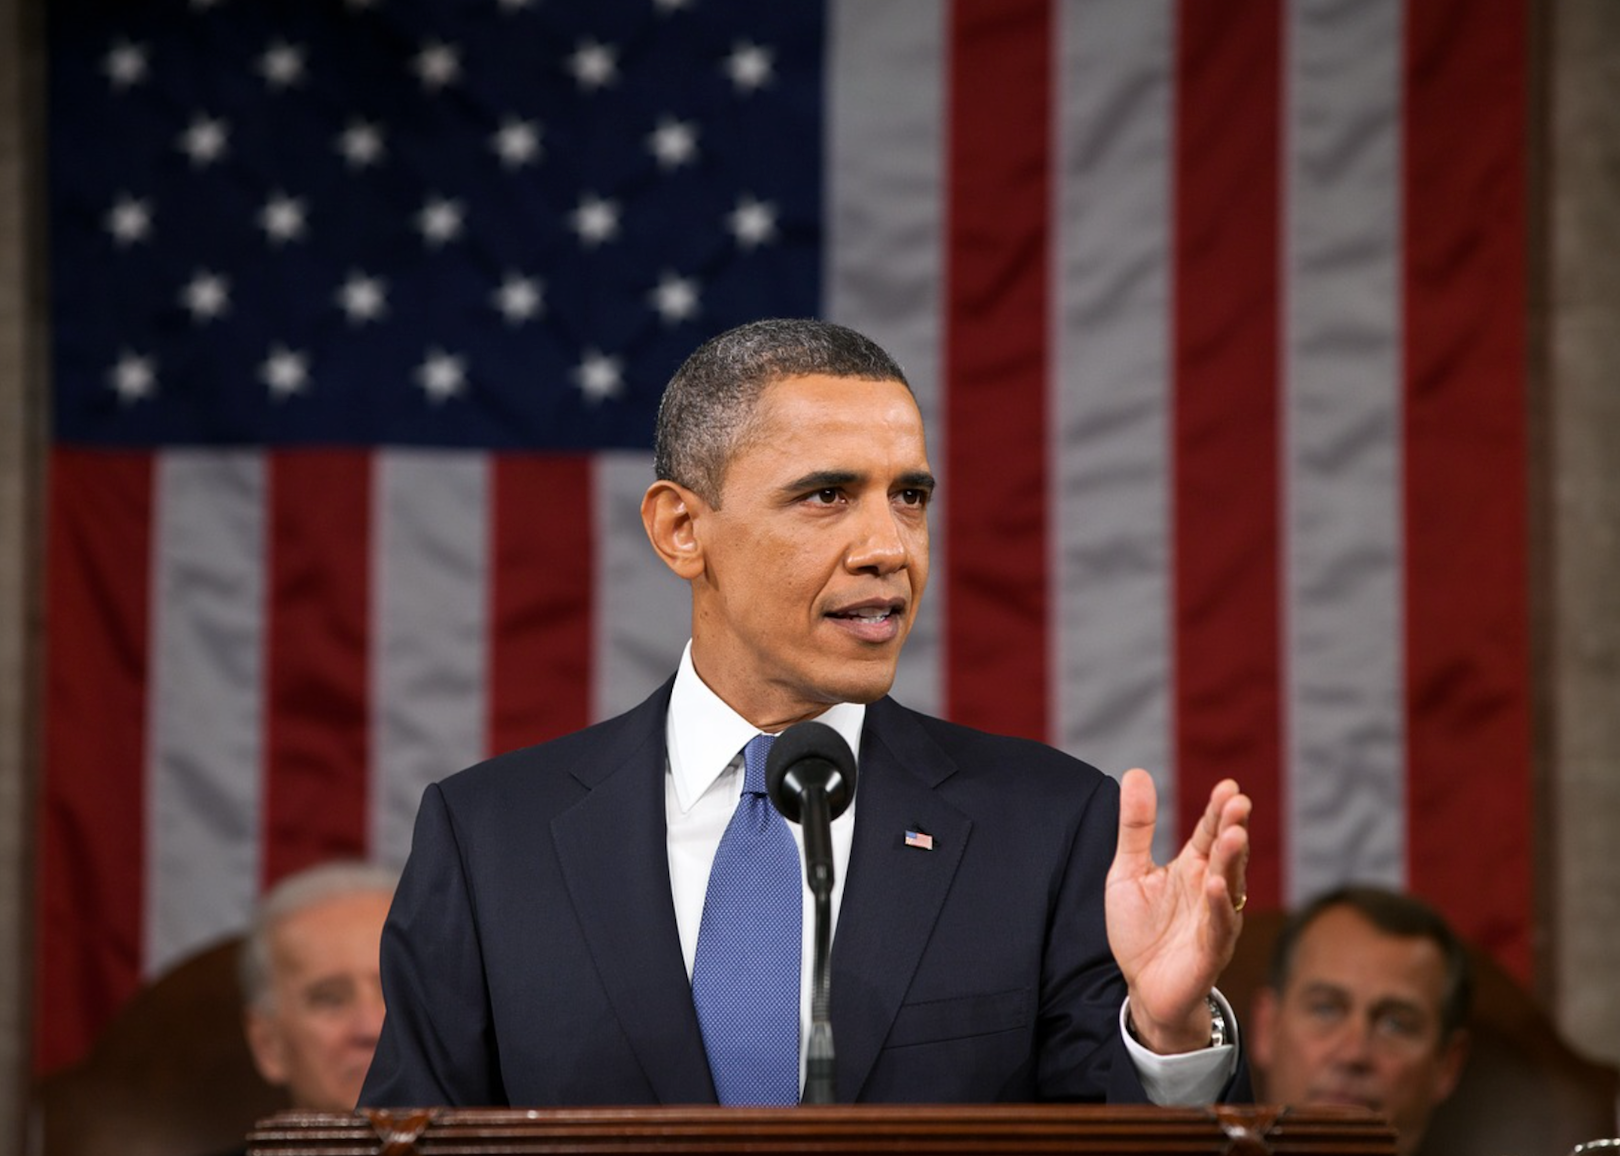 Barack Obama in a black suit at a podium in front of the American flag.